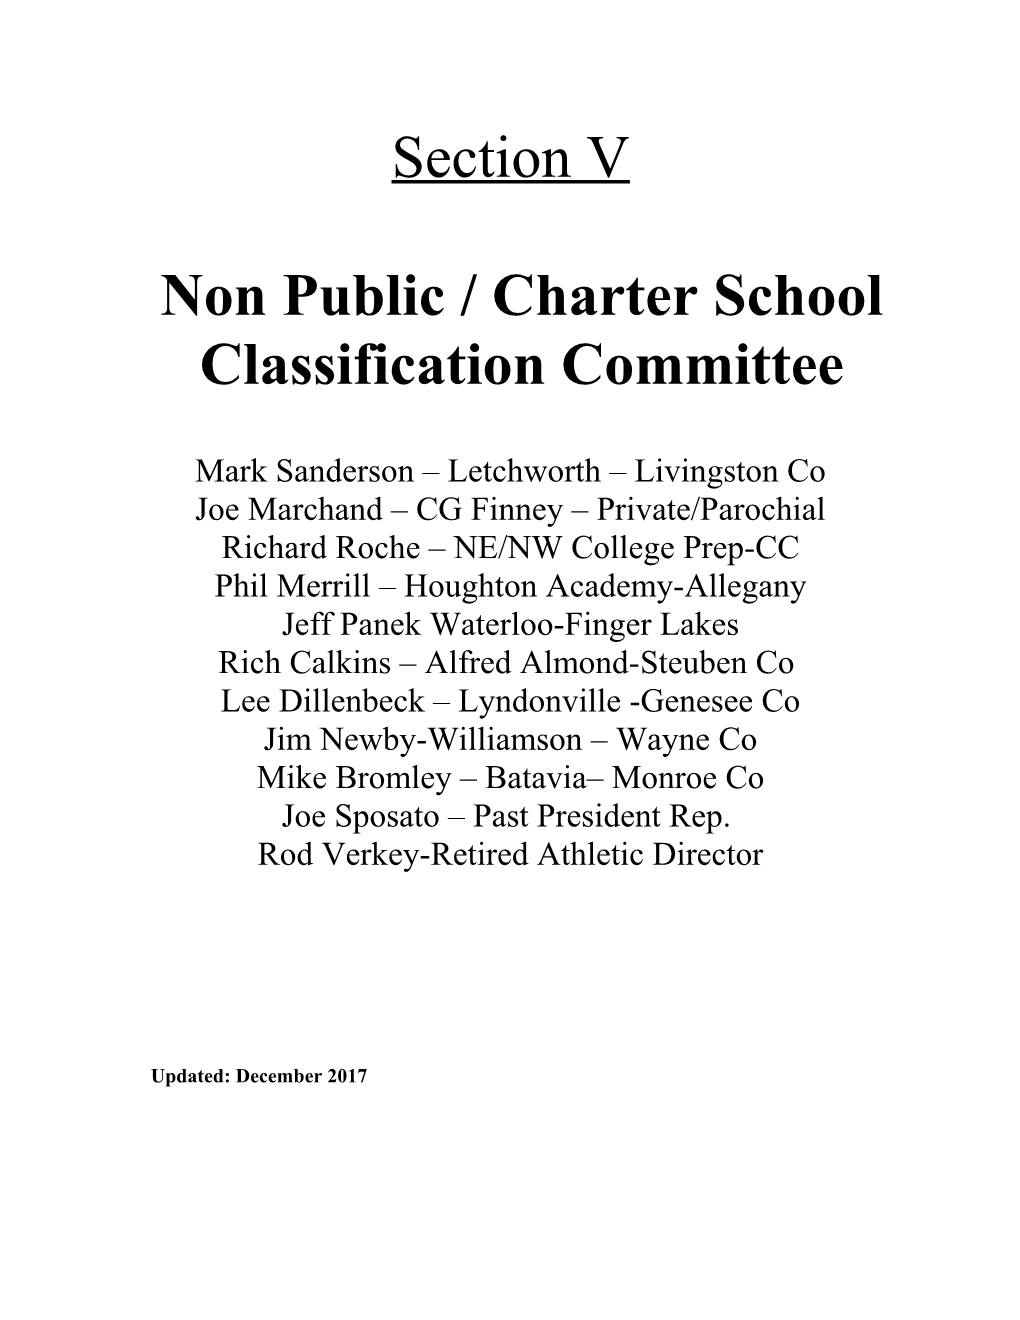 Section 5 Non Public School Classification Committee